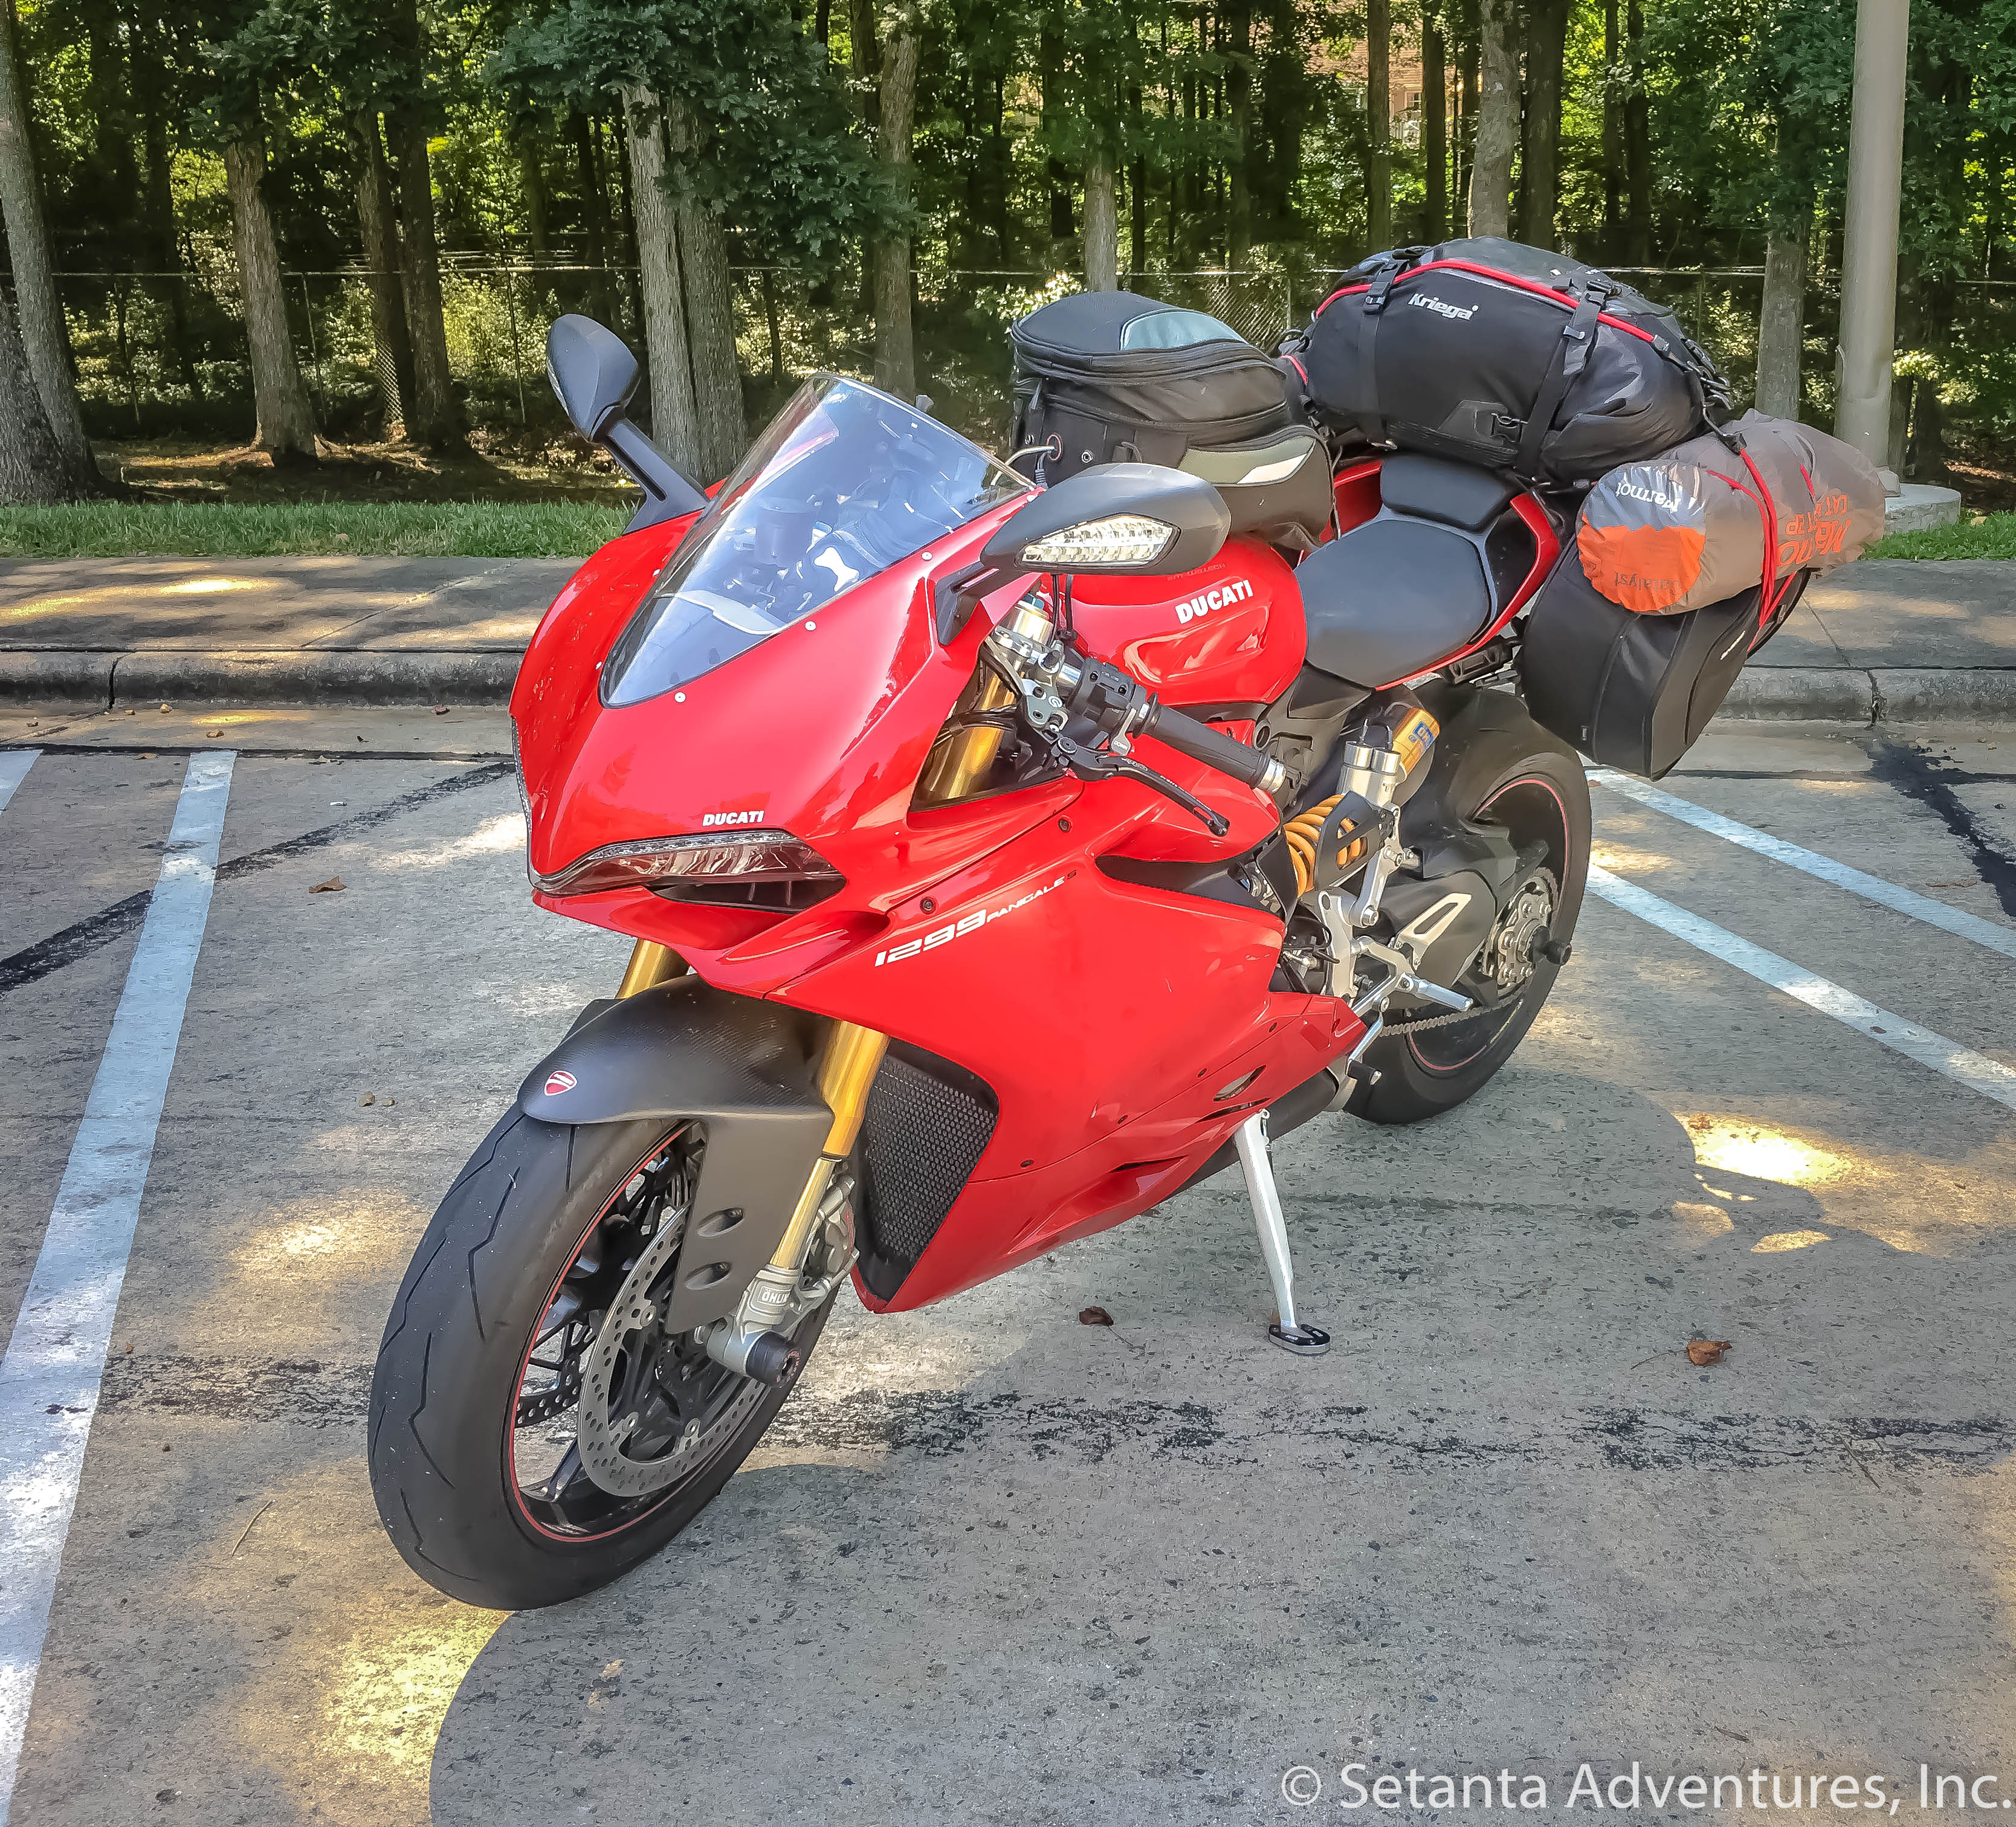 Ducati Pregnigale - Loaded up - Tail of the Dragon trip - 14 July 2017